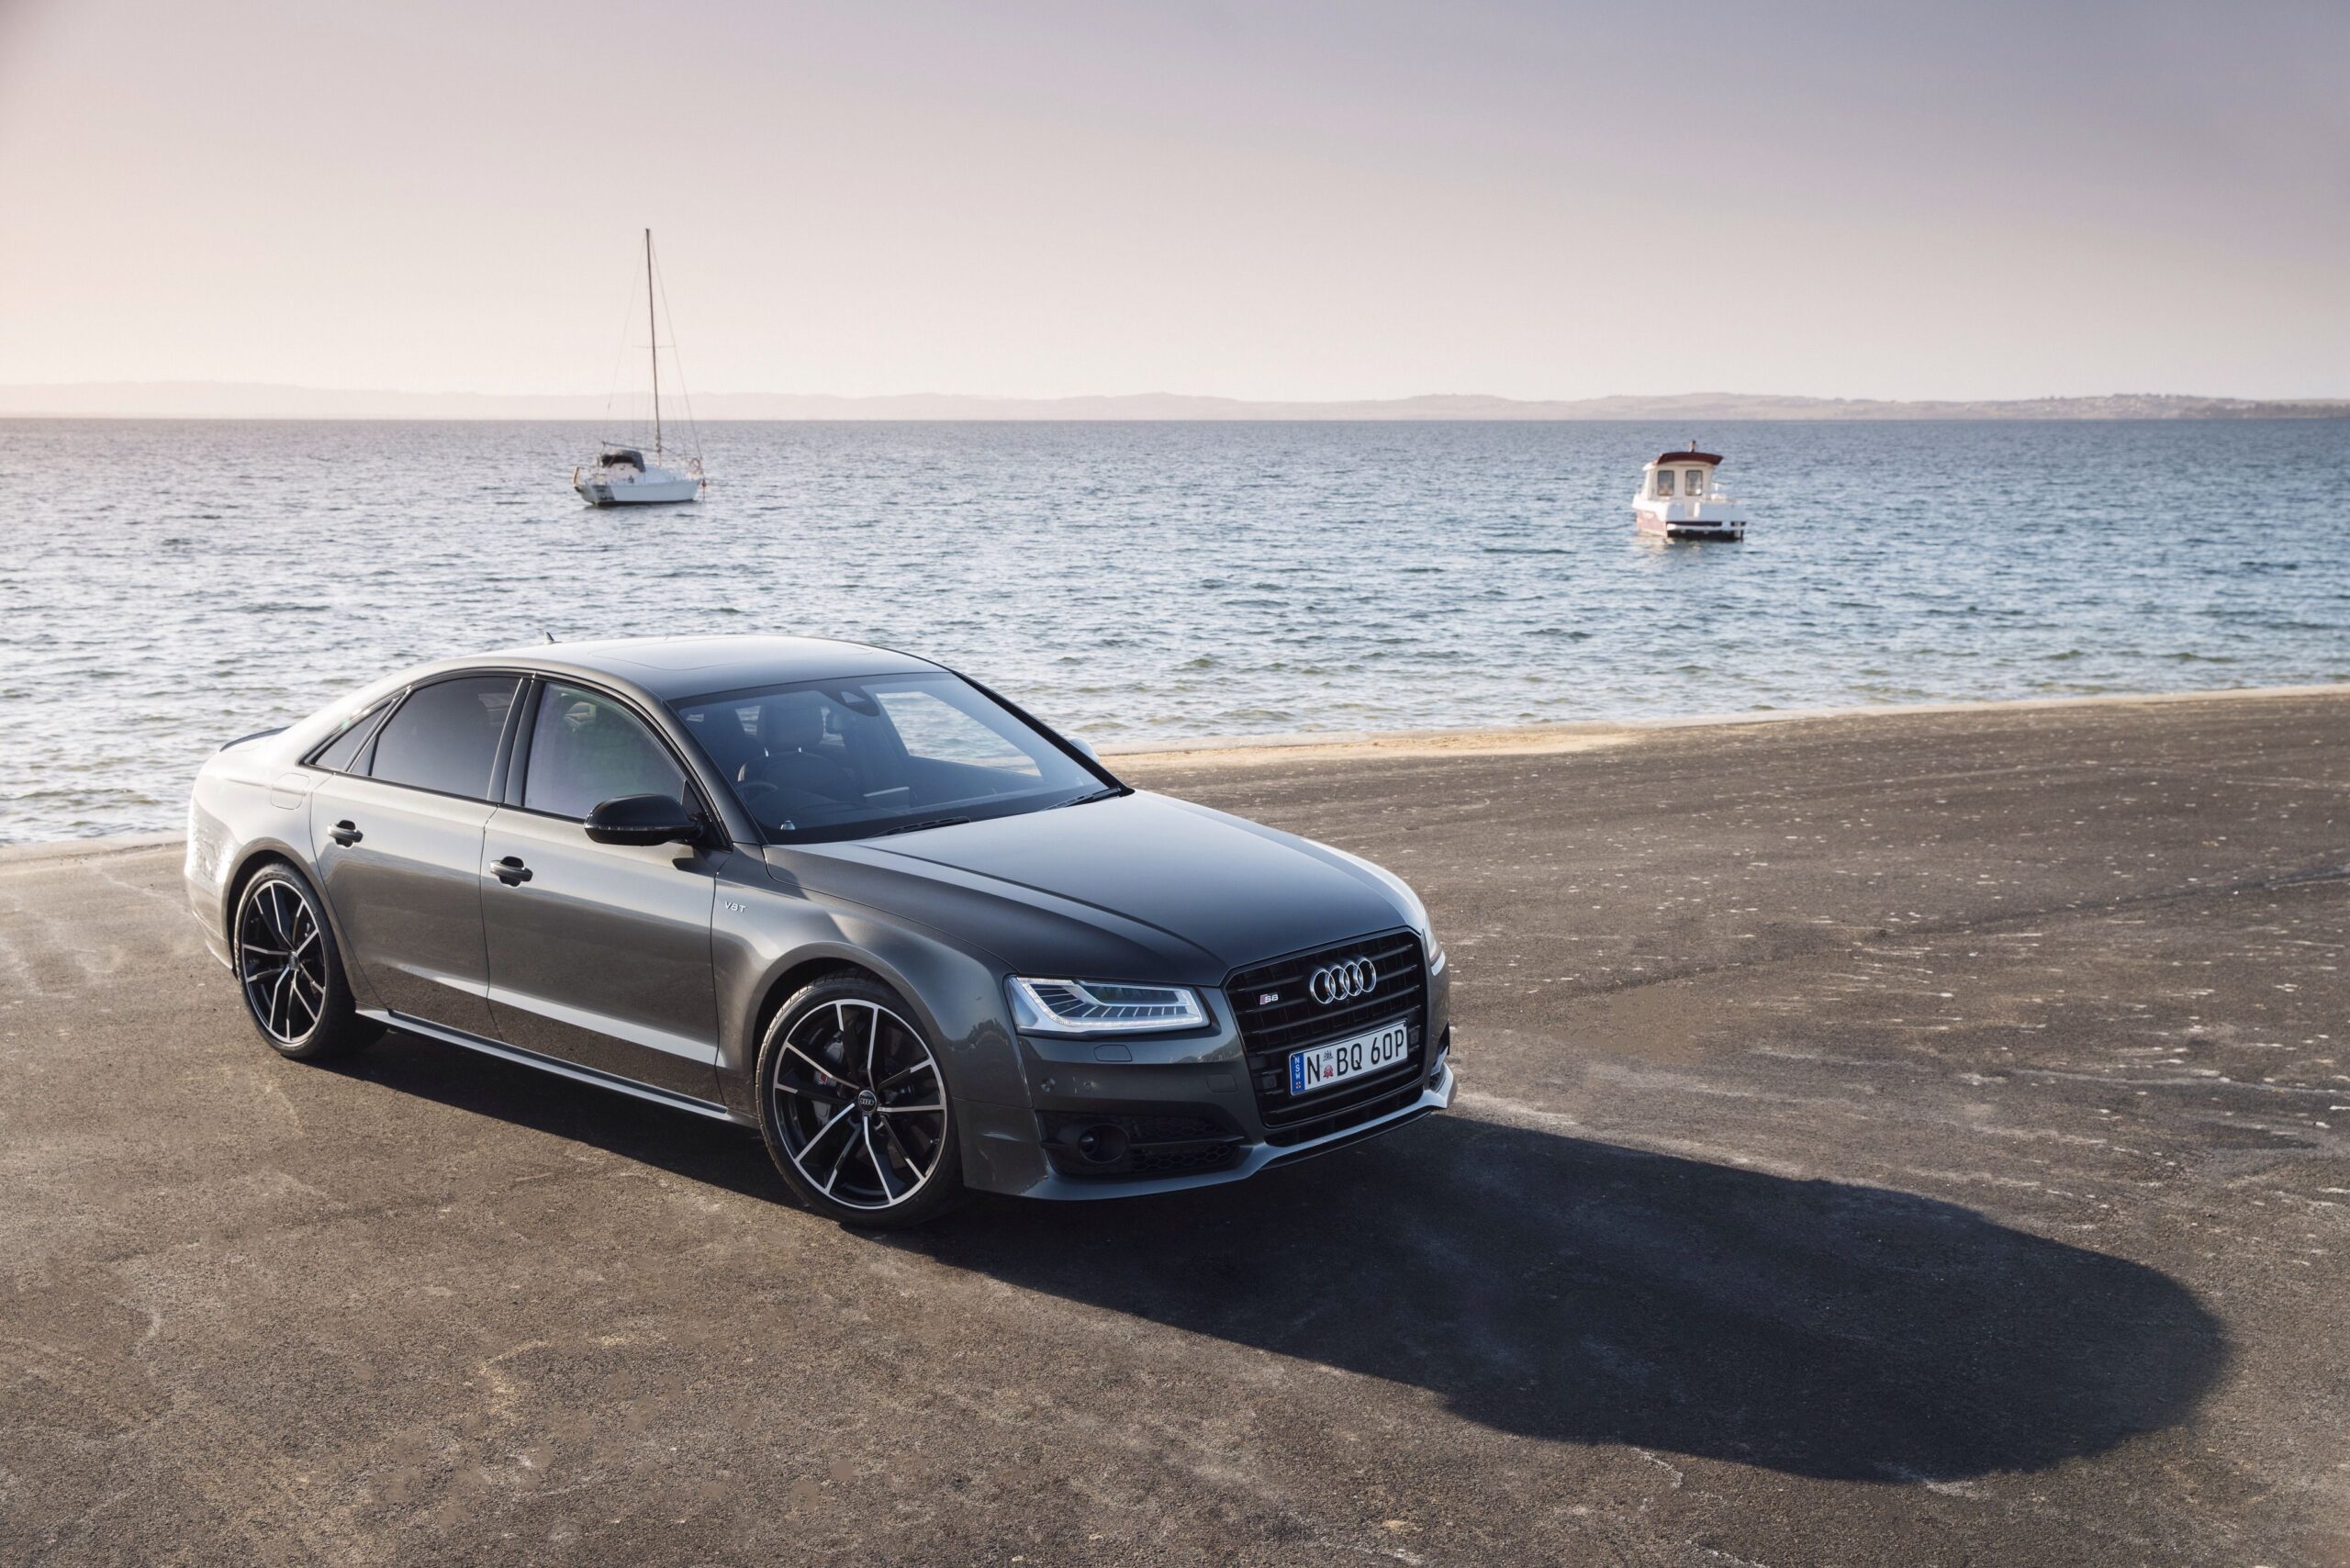 Wallpapers Audi, S, Side view, Sea HD, Picture, Wallpaper